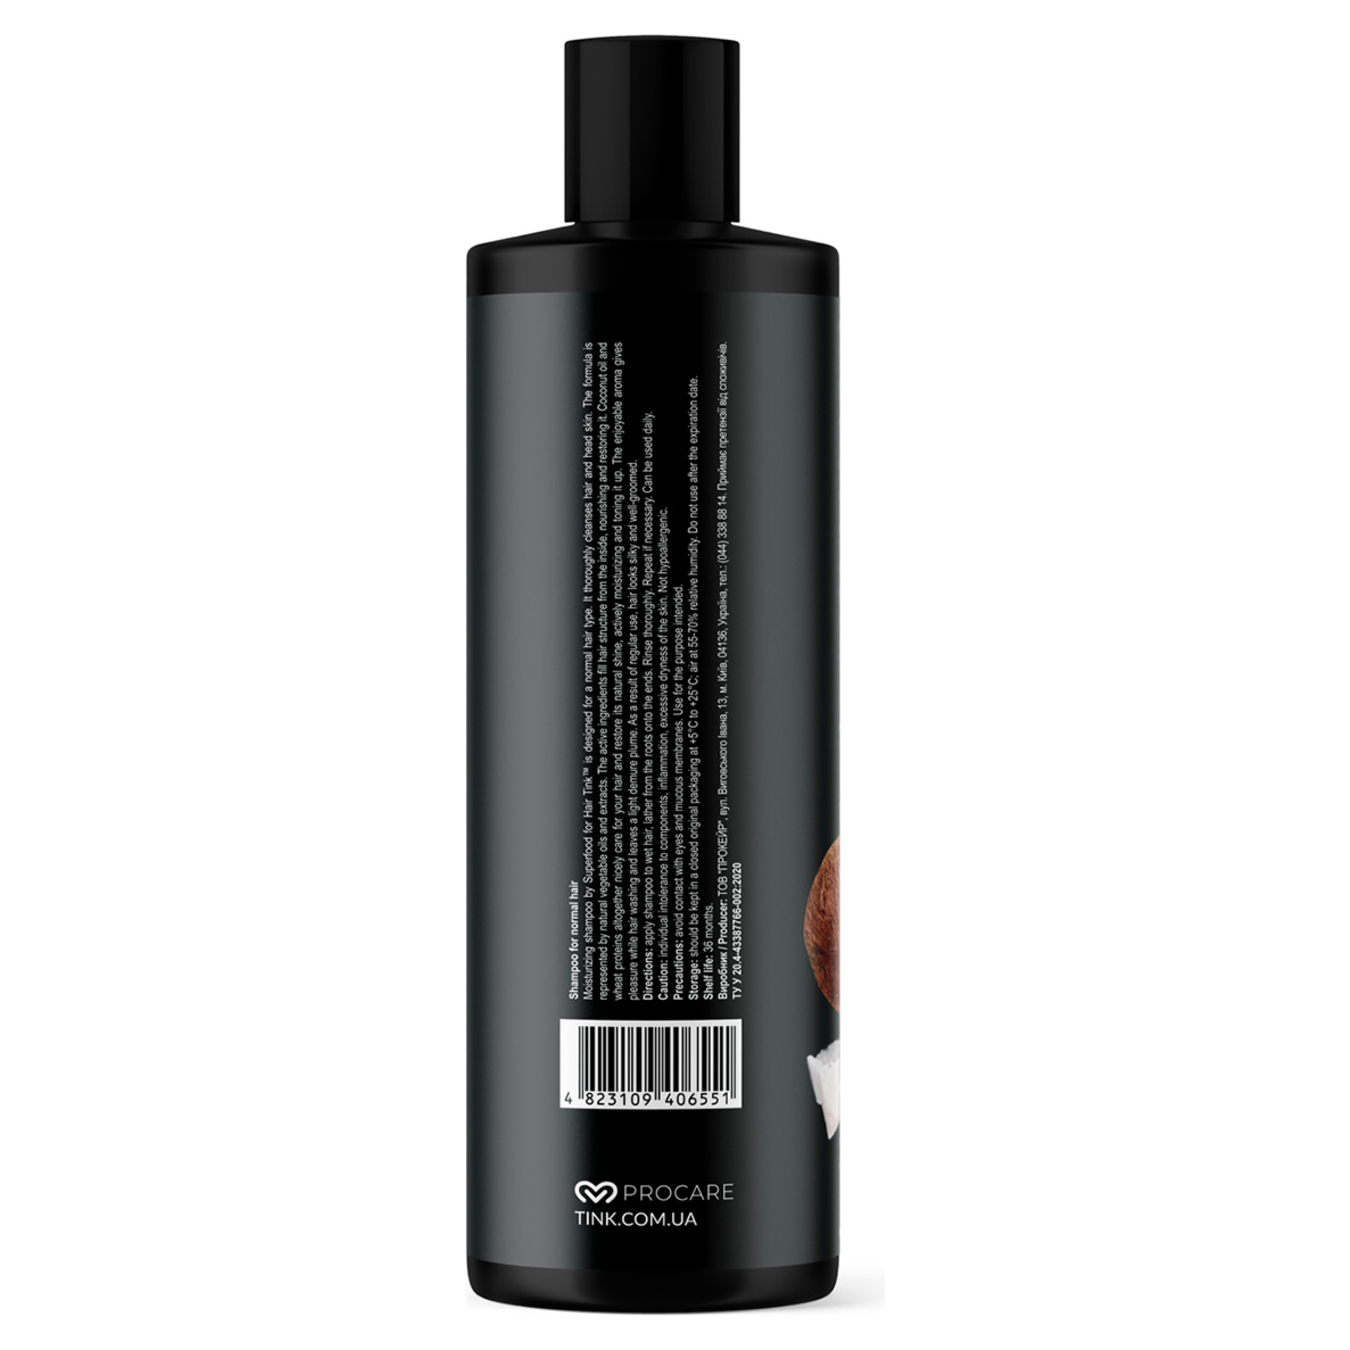 Shampoo Tink Coconut Wheat proteins for normal hair 500ml 2